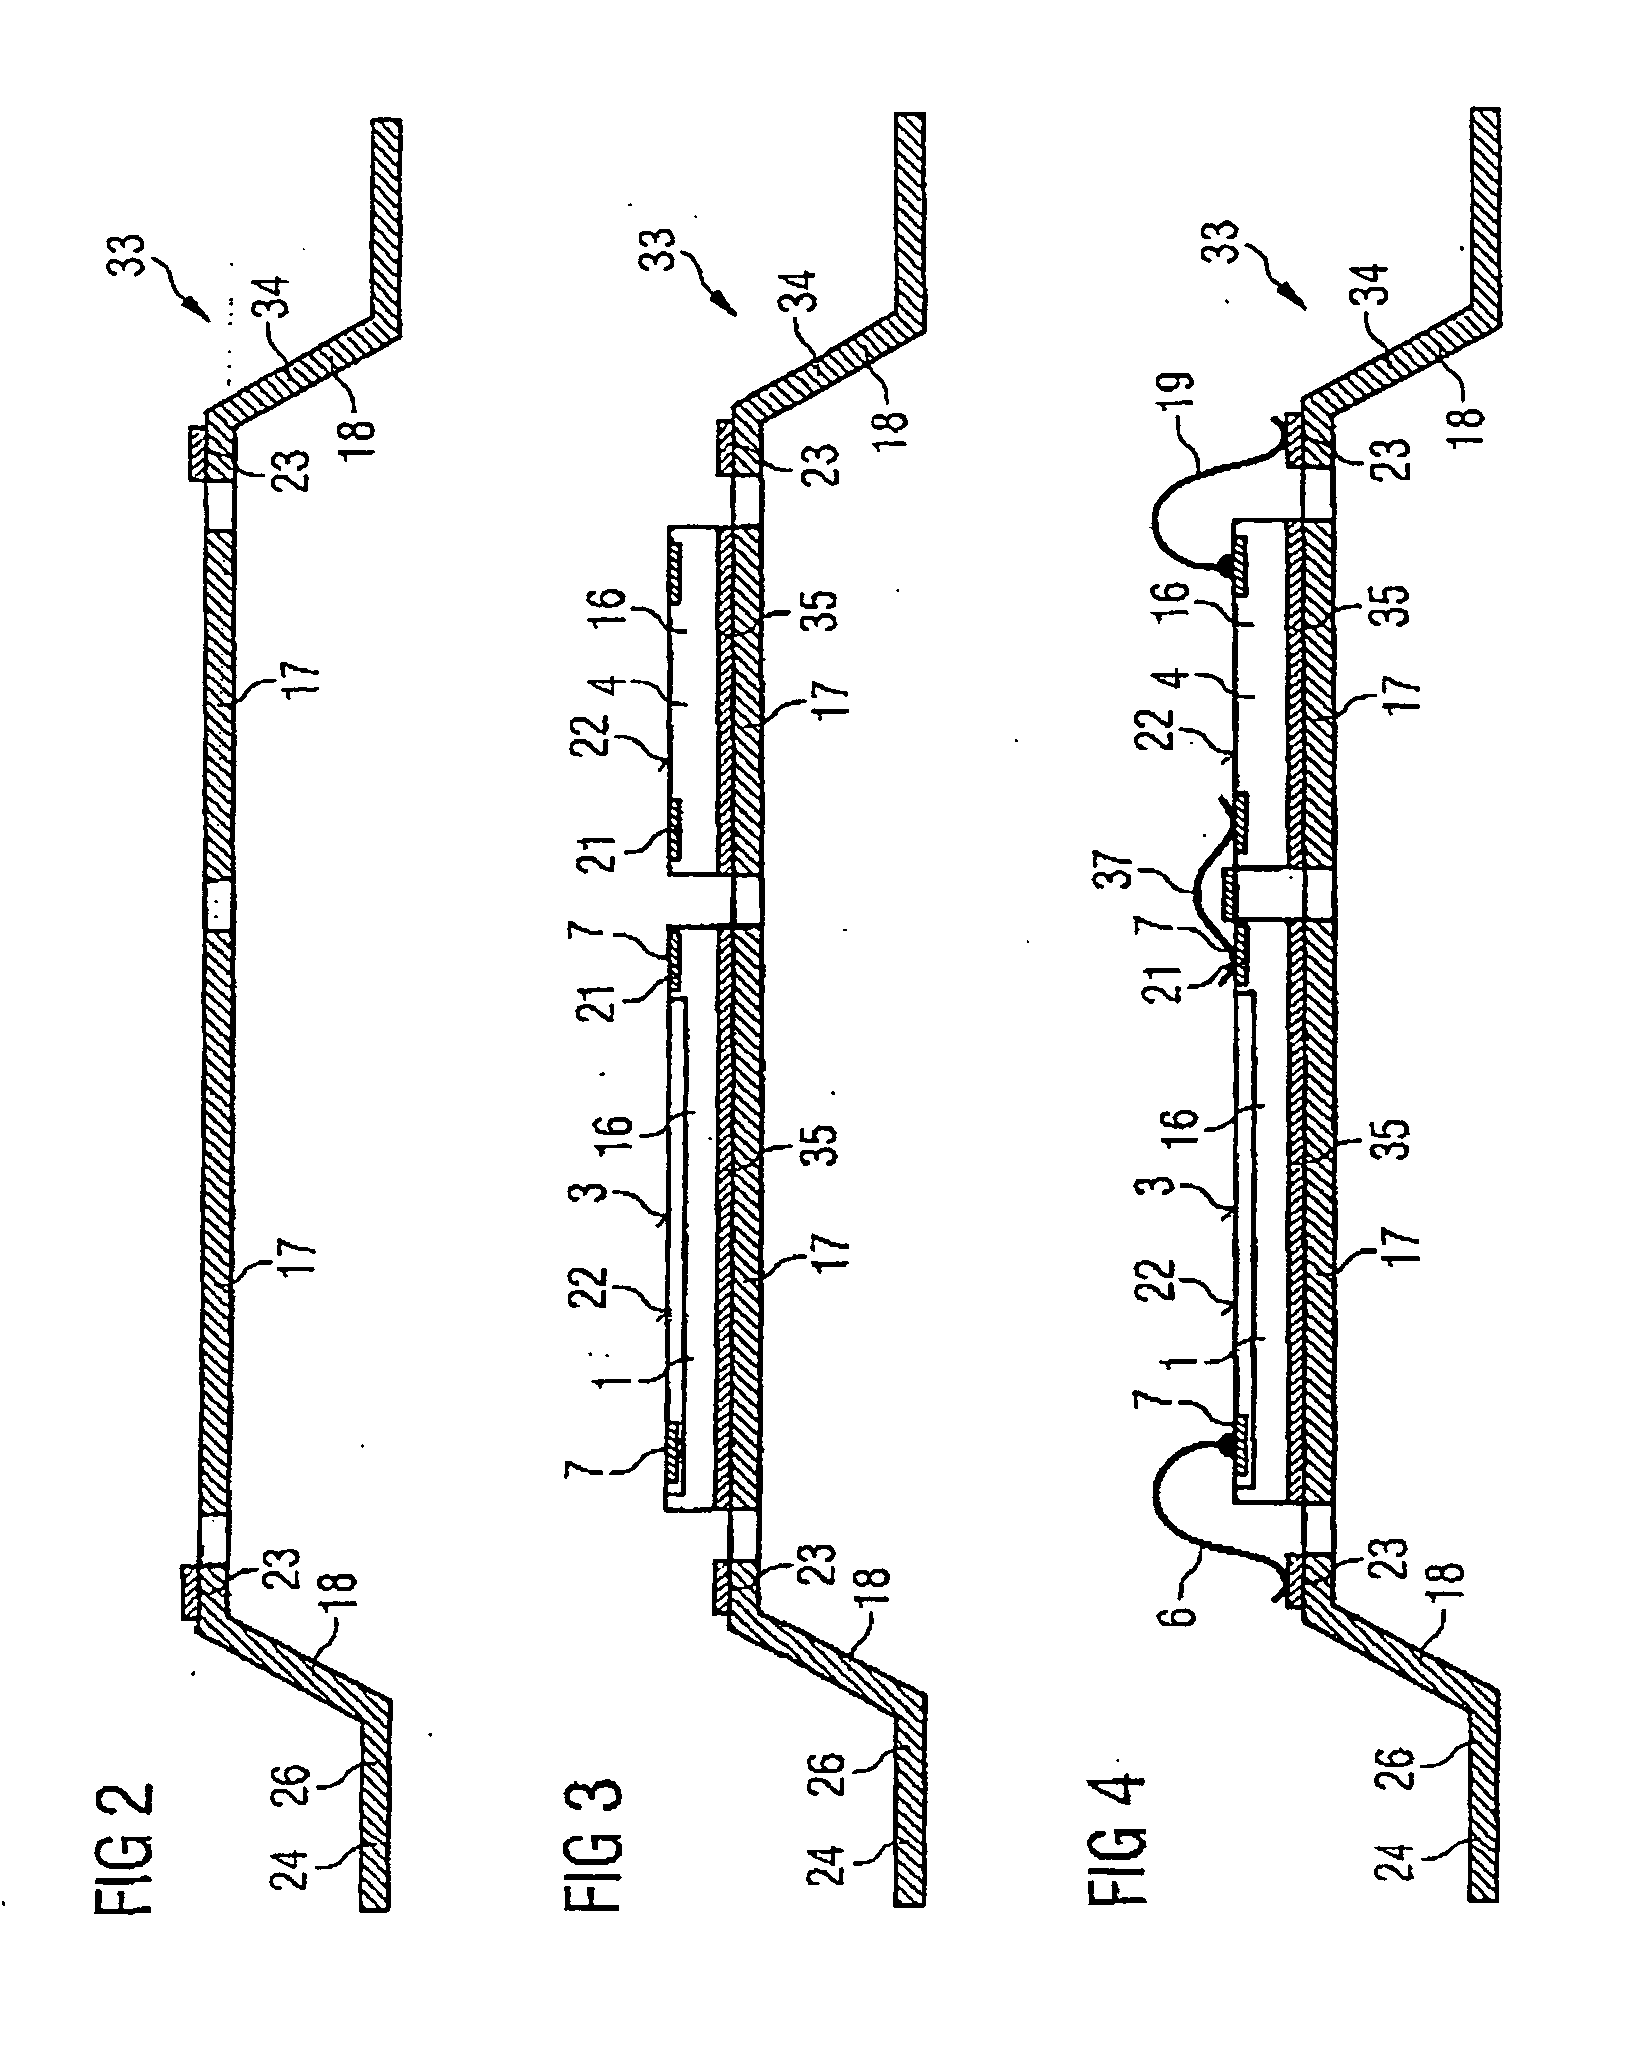 Semiconductor module with a semiconductor sensor chip and a plastic package as well as method for its production